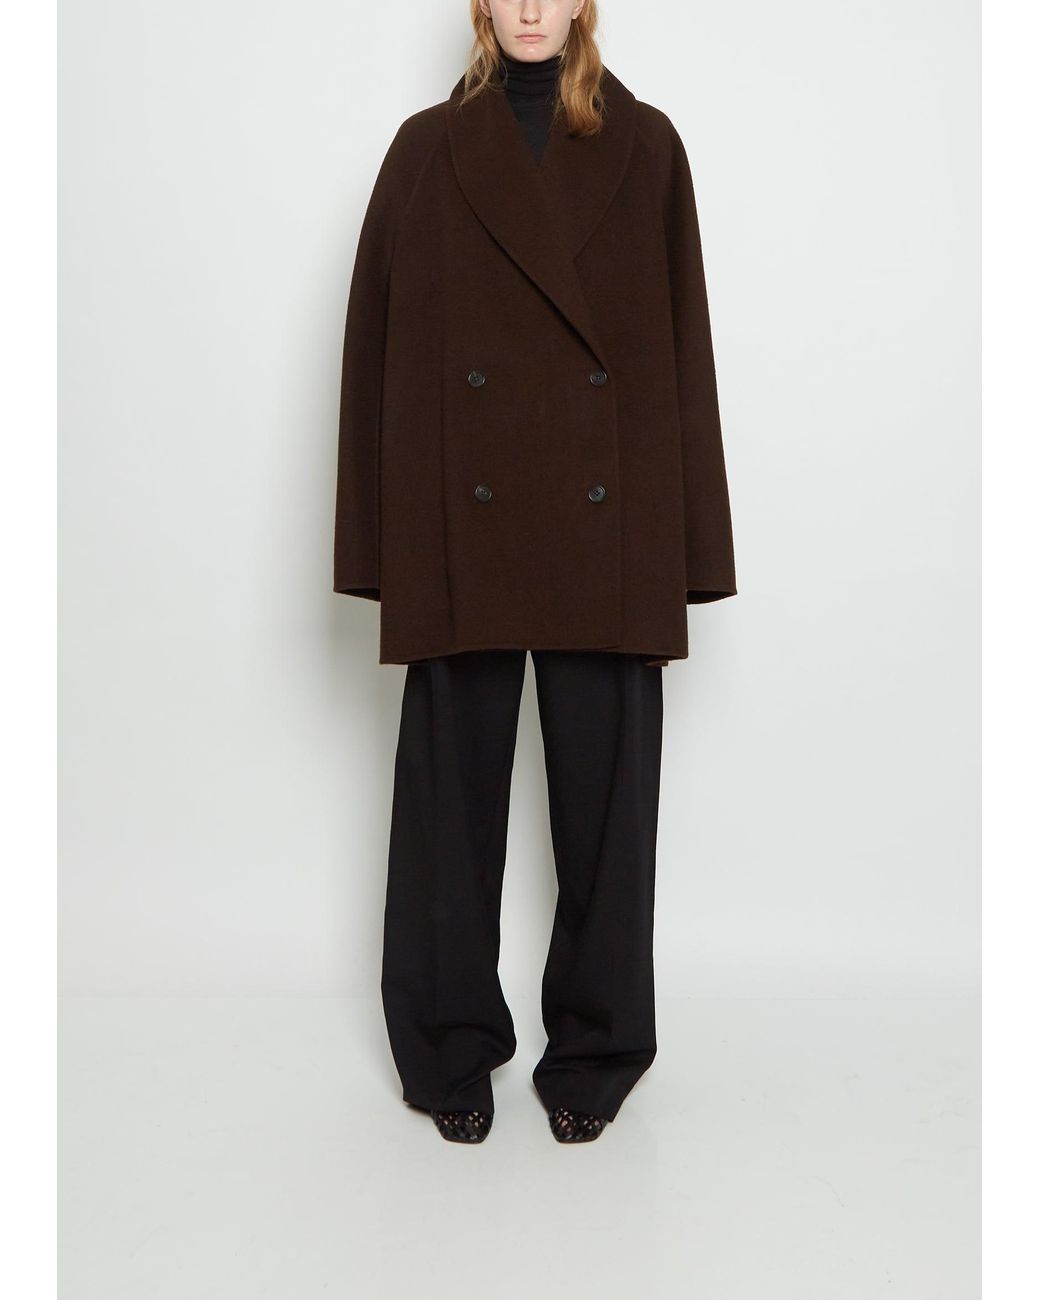 The Row Wool & Cashmere Polli Jacket in Brown | Lyst